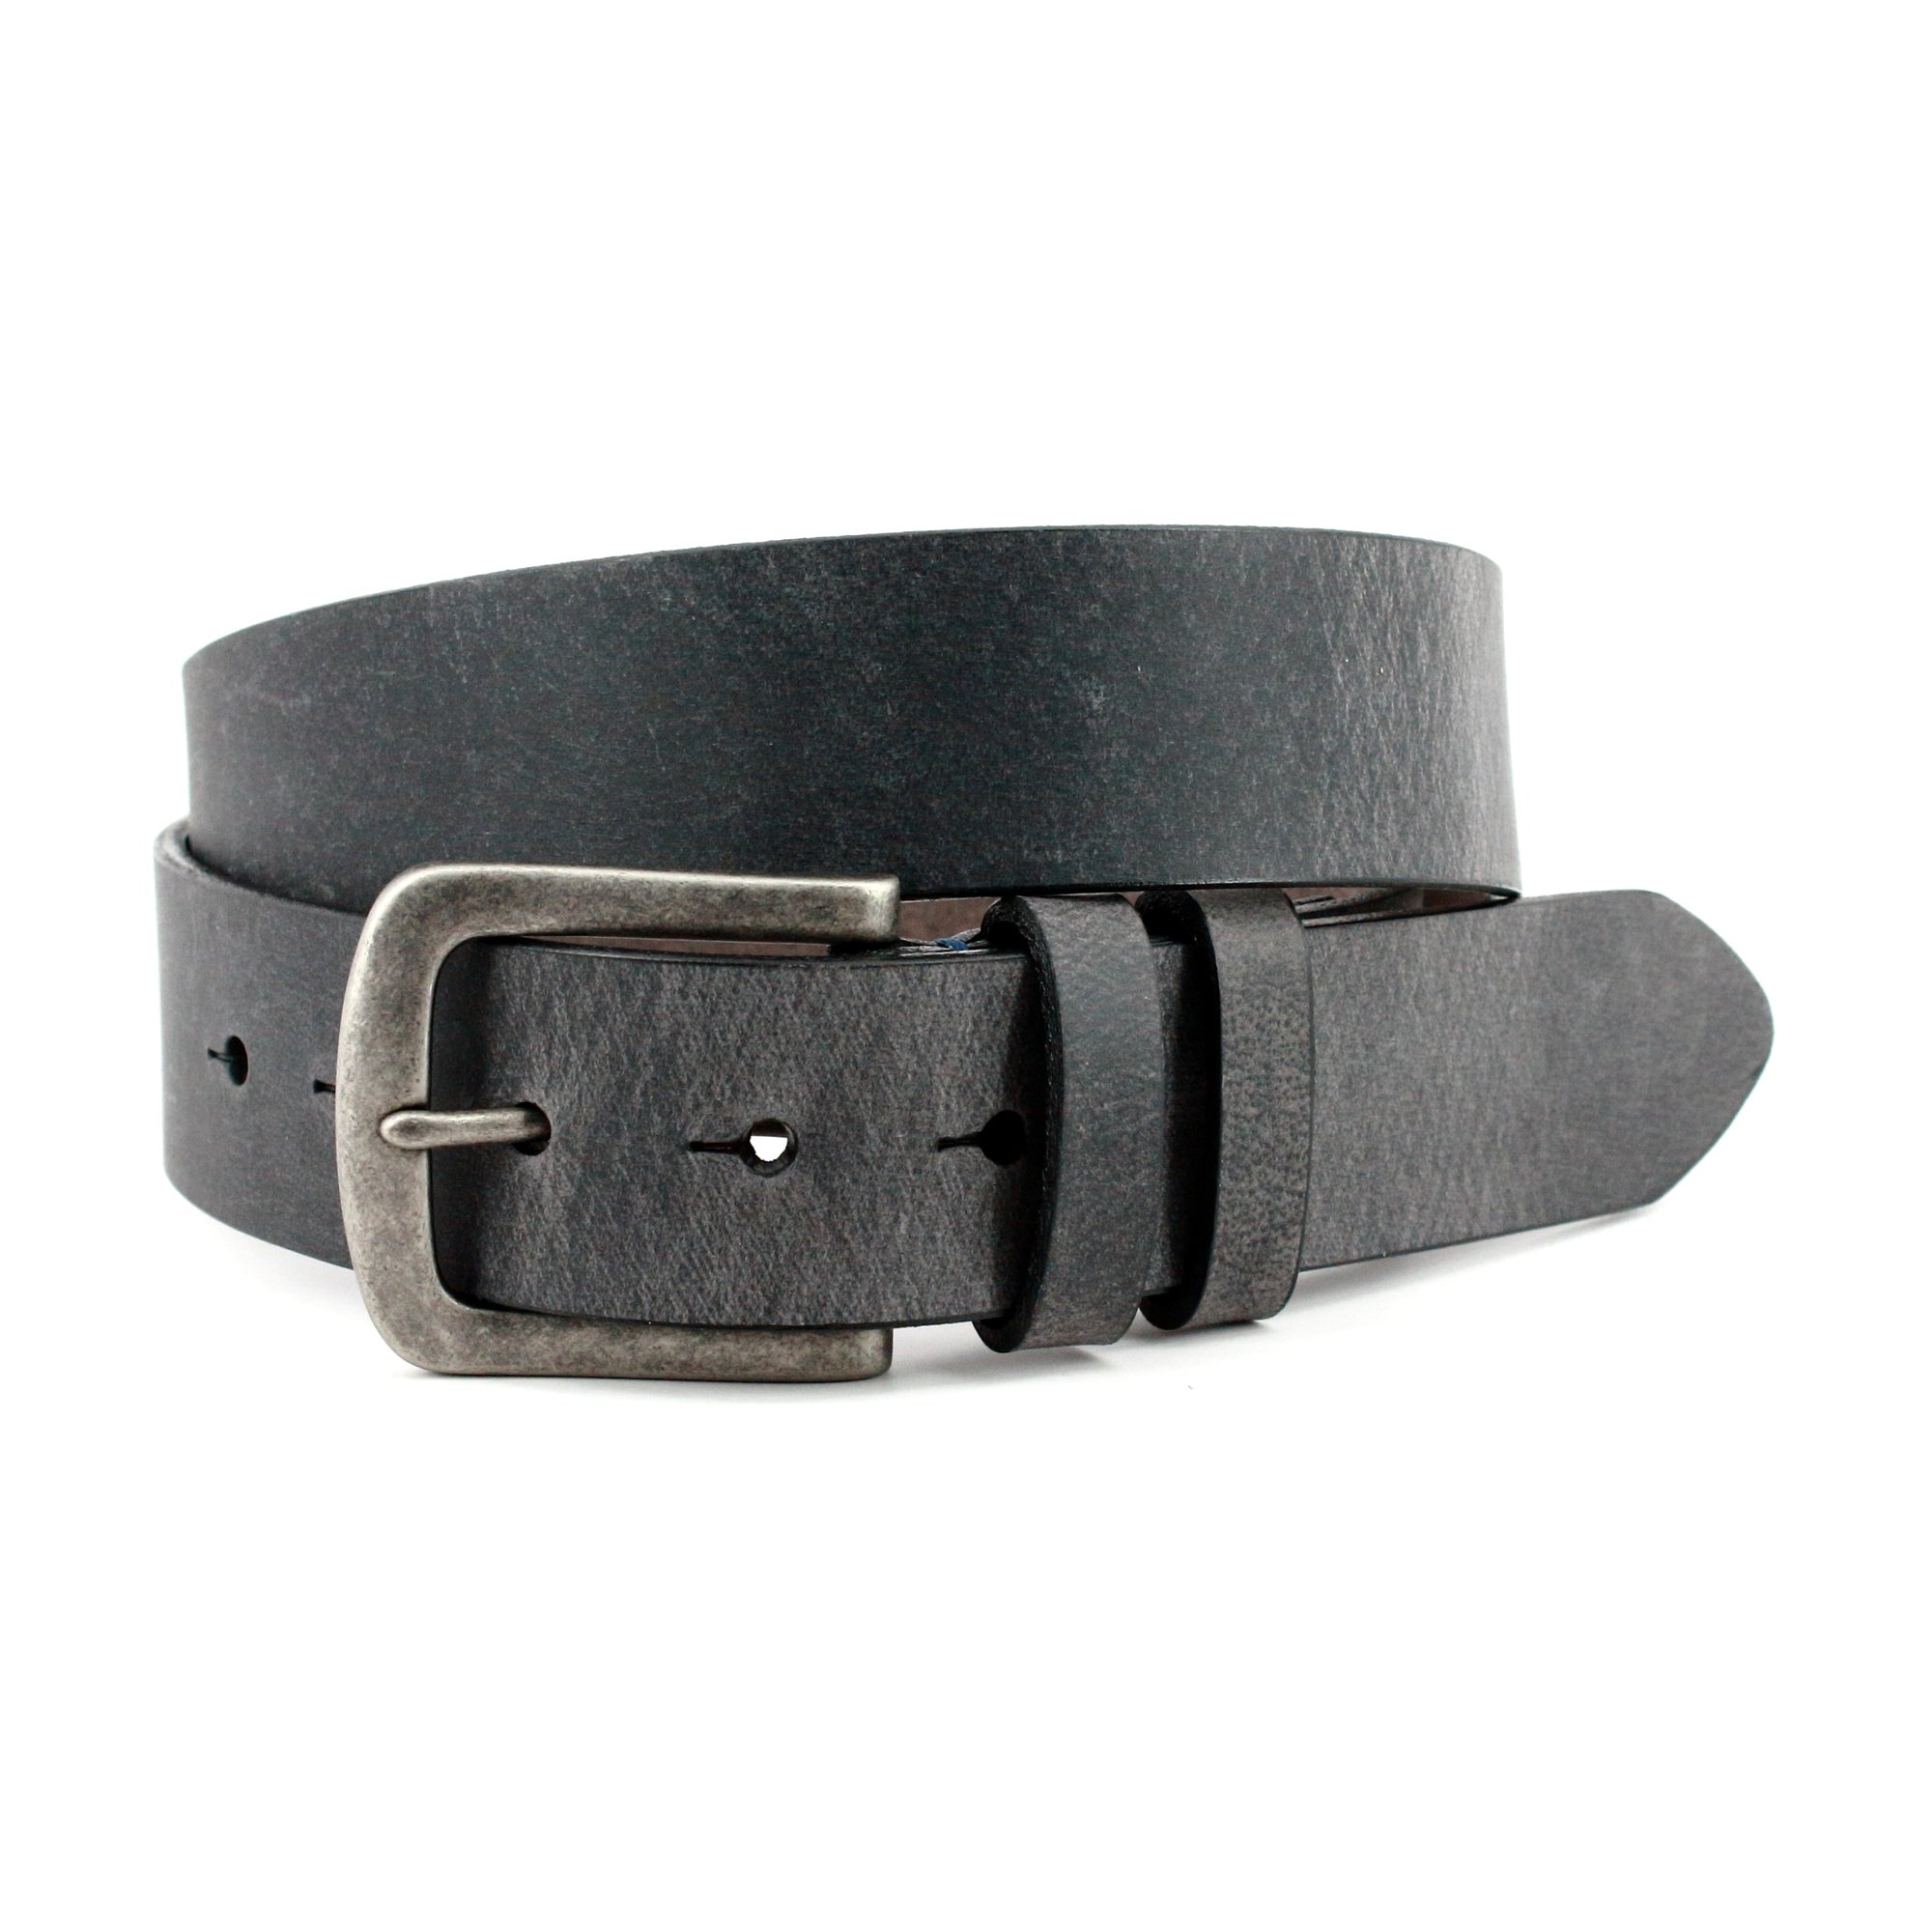 Distressed Waxed Harness Leather Belt in Charcoal by Torino Leather